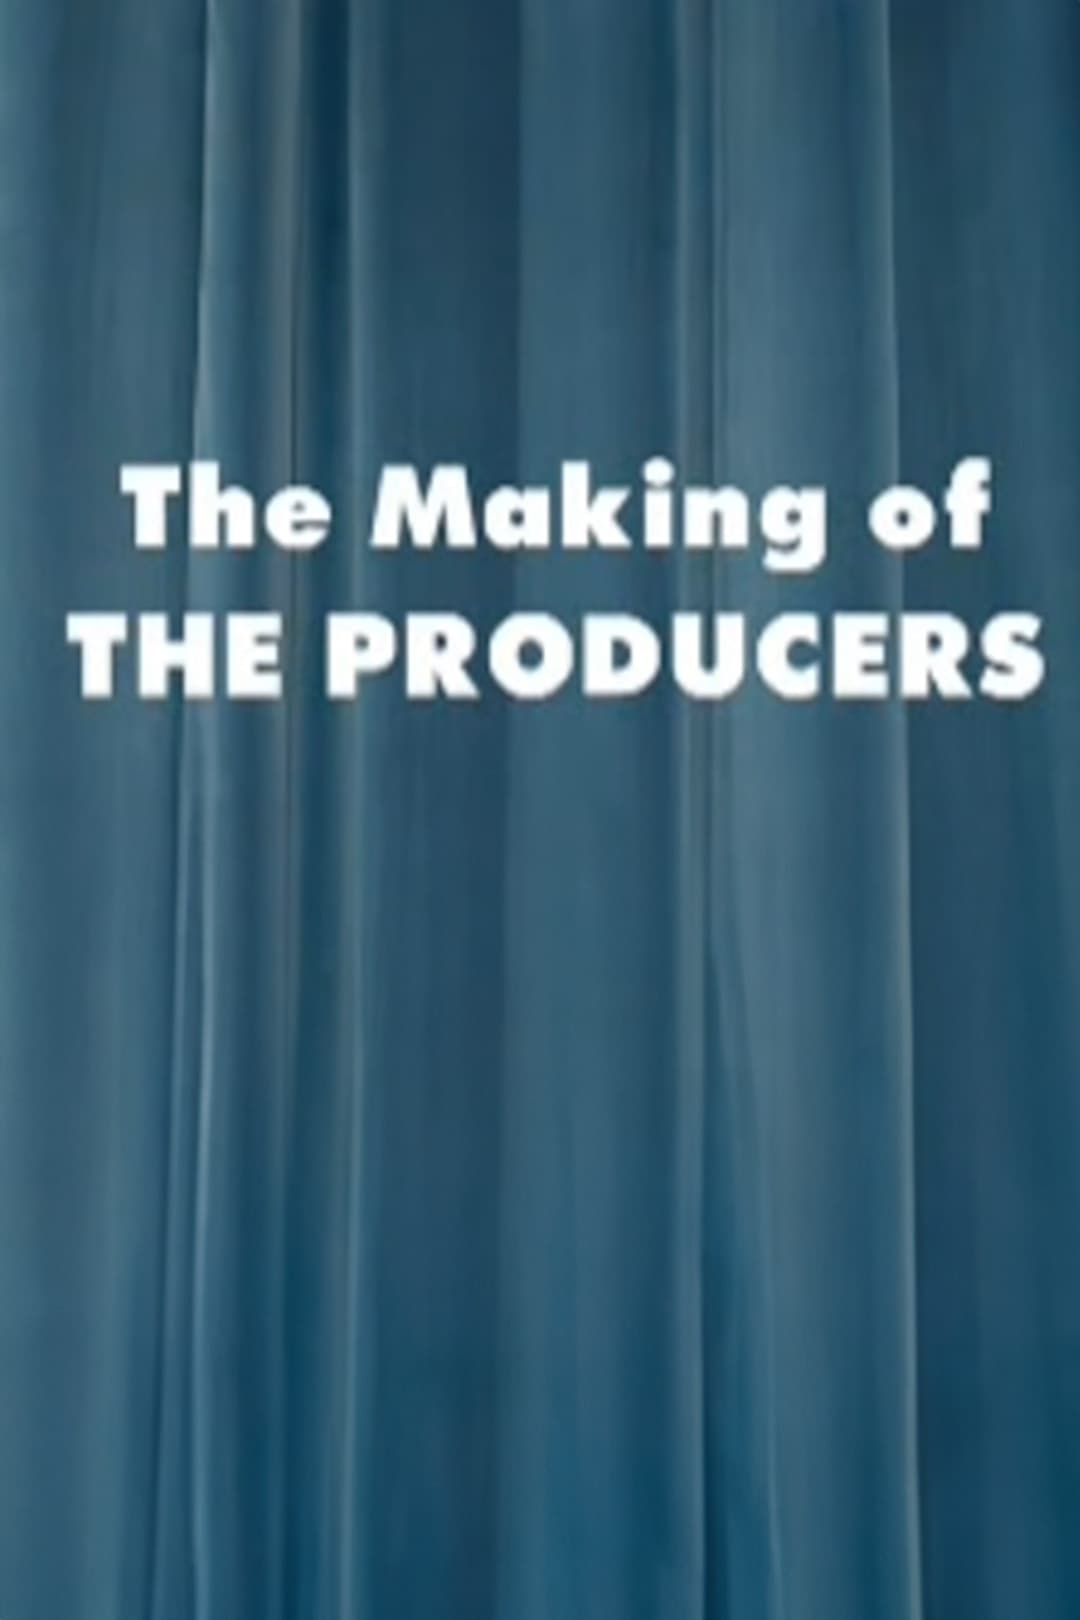 The Making of 'The Producers' (2004)